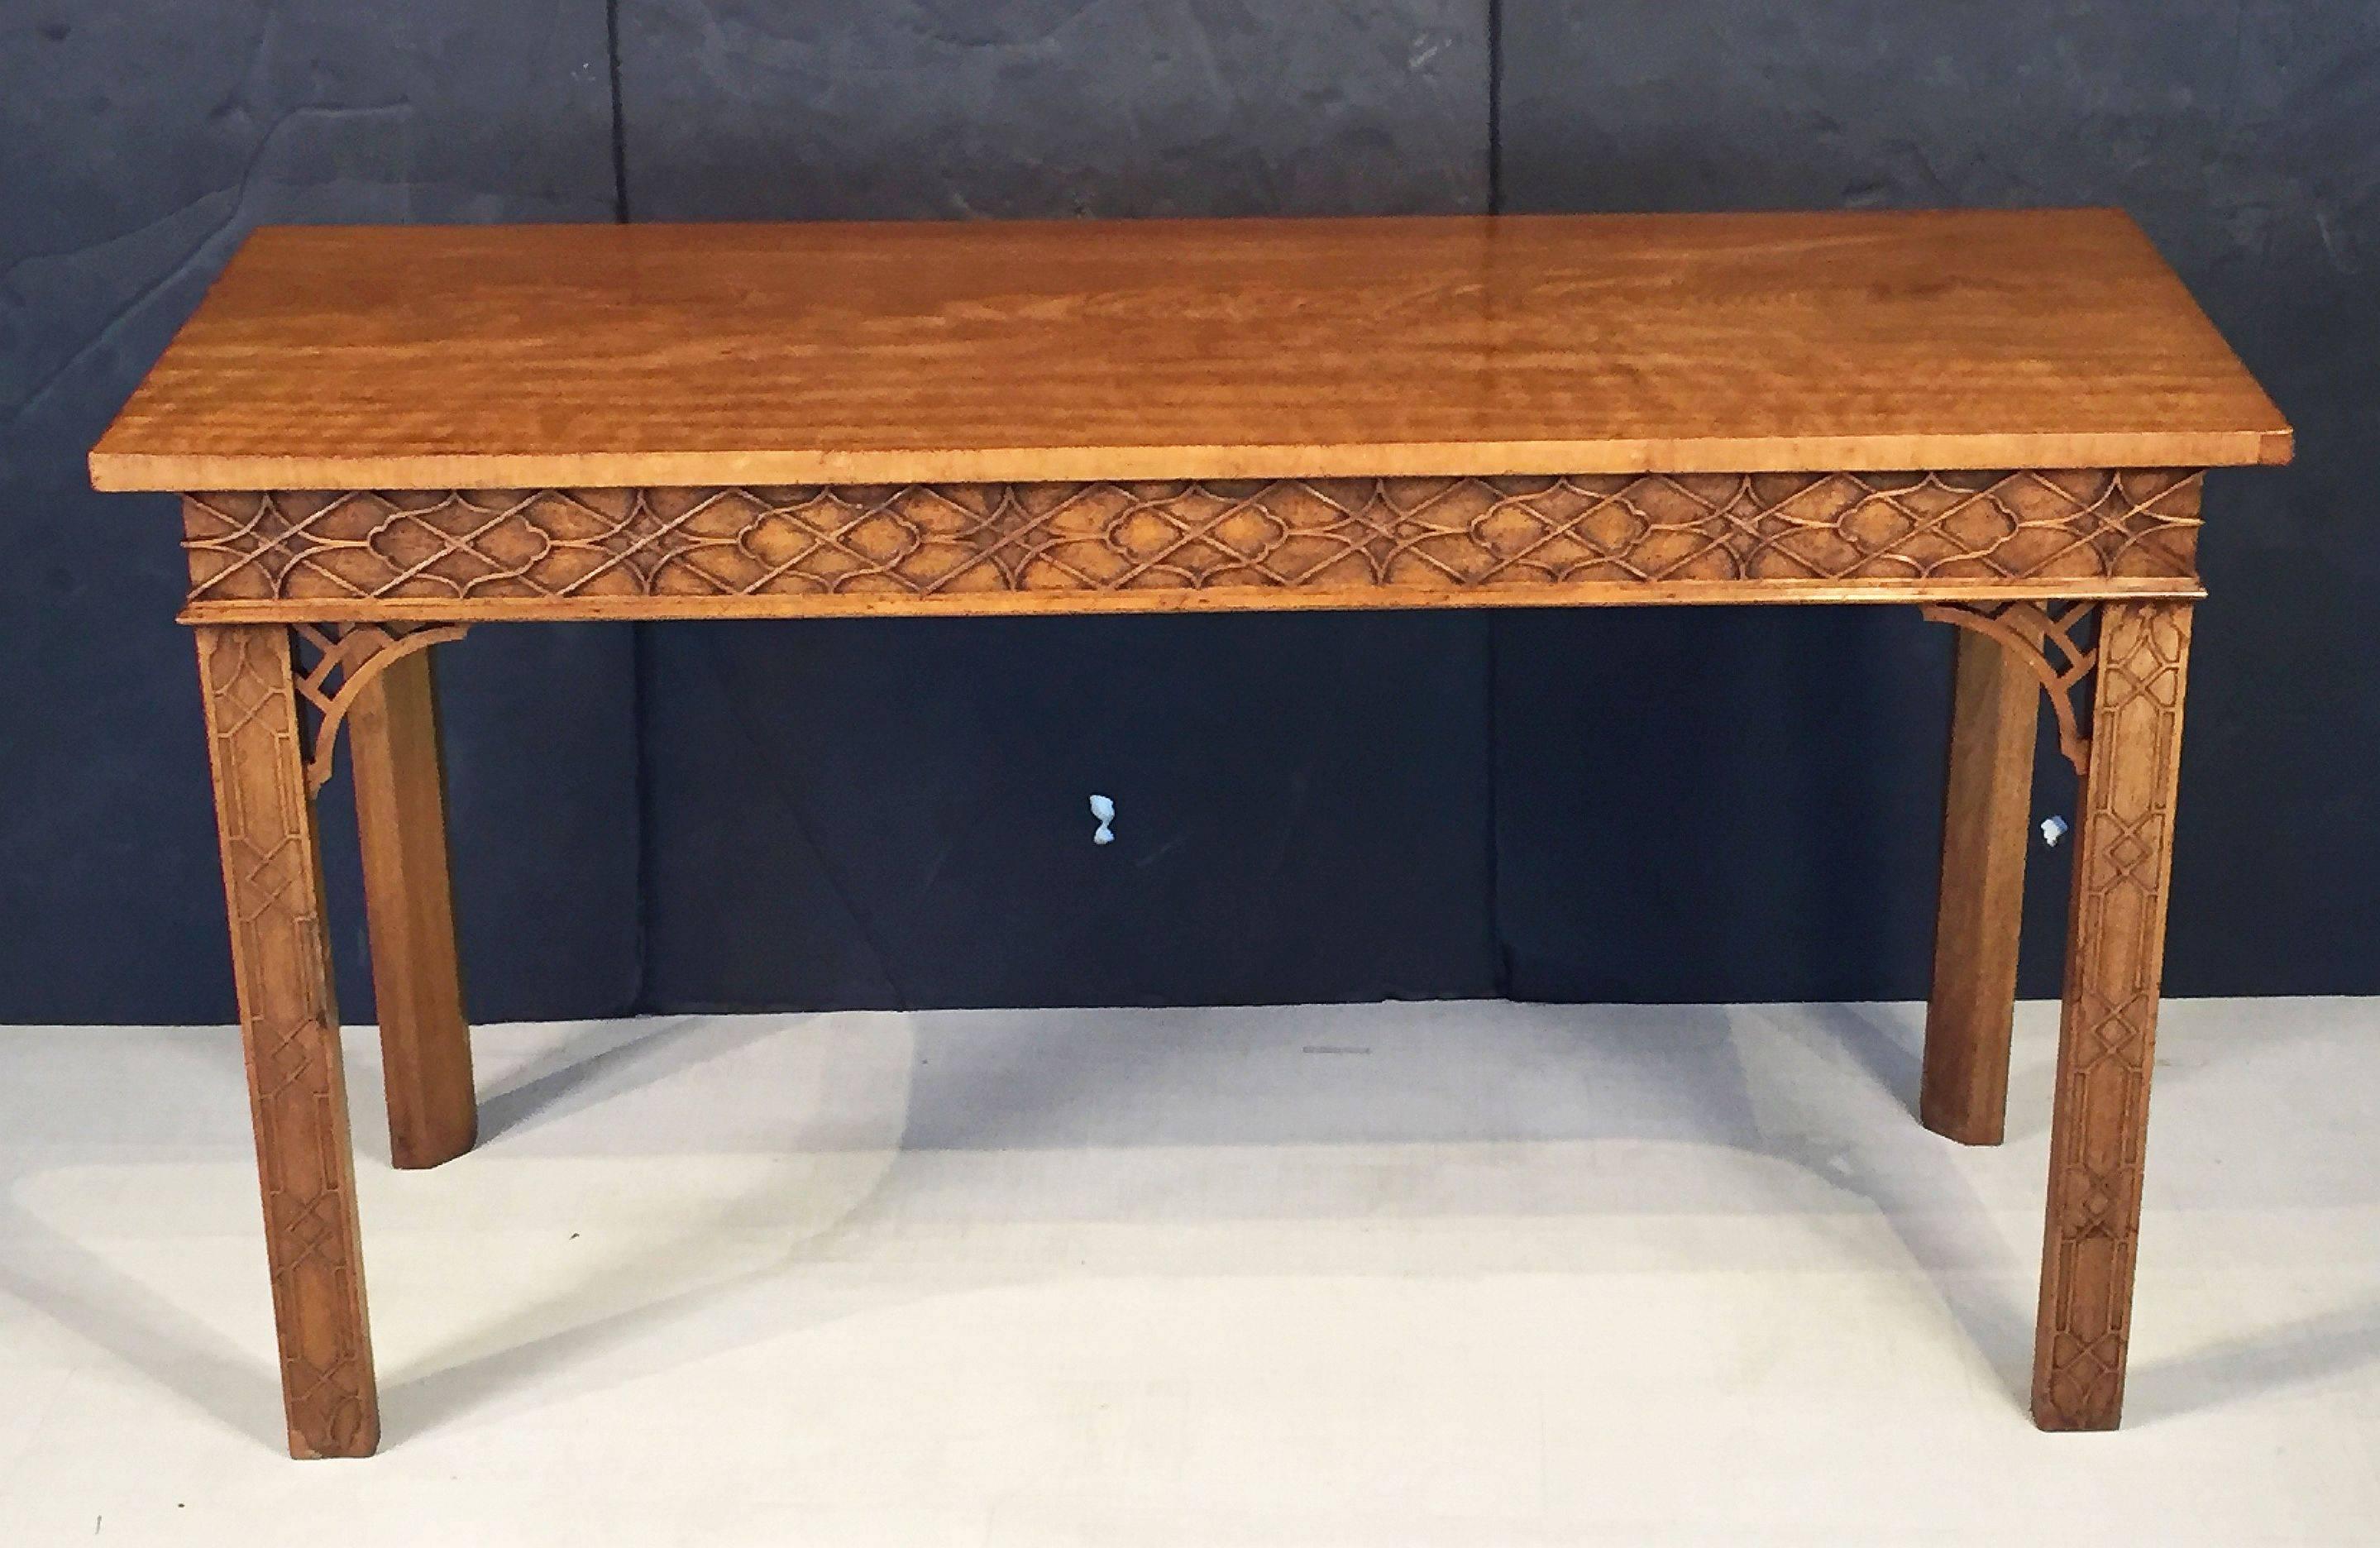 A fine English walnut console table or buffet server in the Chinese Chippendale style, featuring a figured walnut top over a carved fretwork frieze to the front and sides, on handsome carved canted supports, each leg with carved fretwork at the